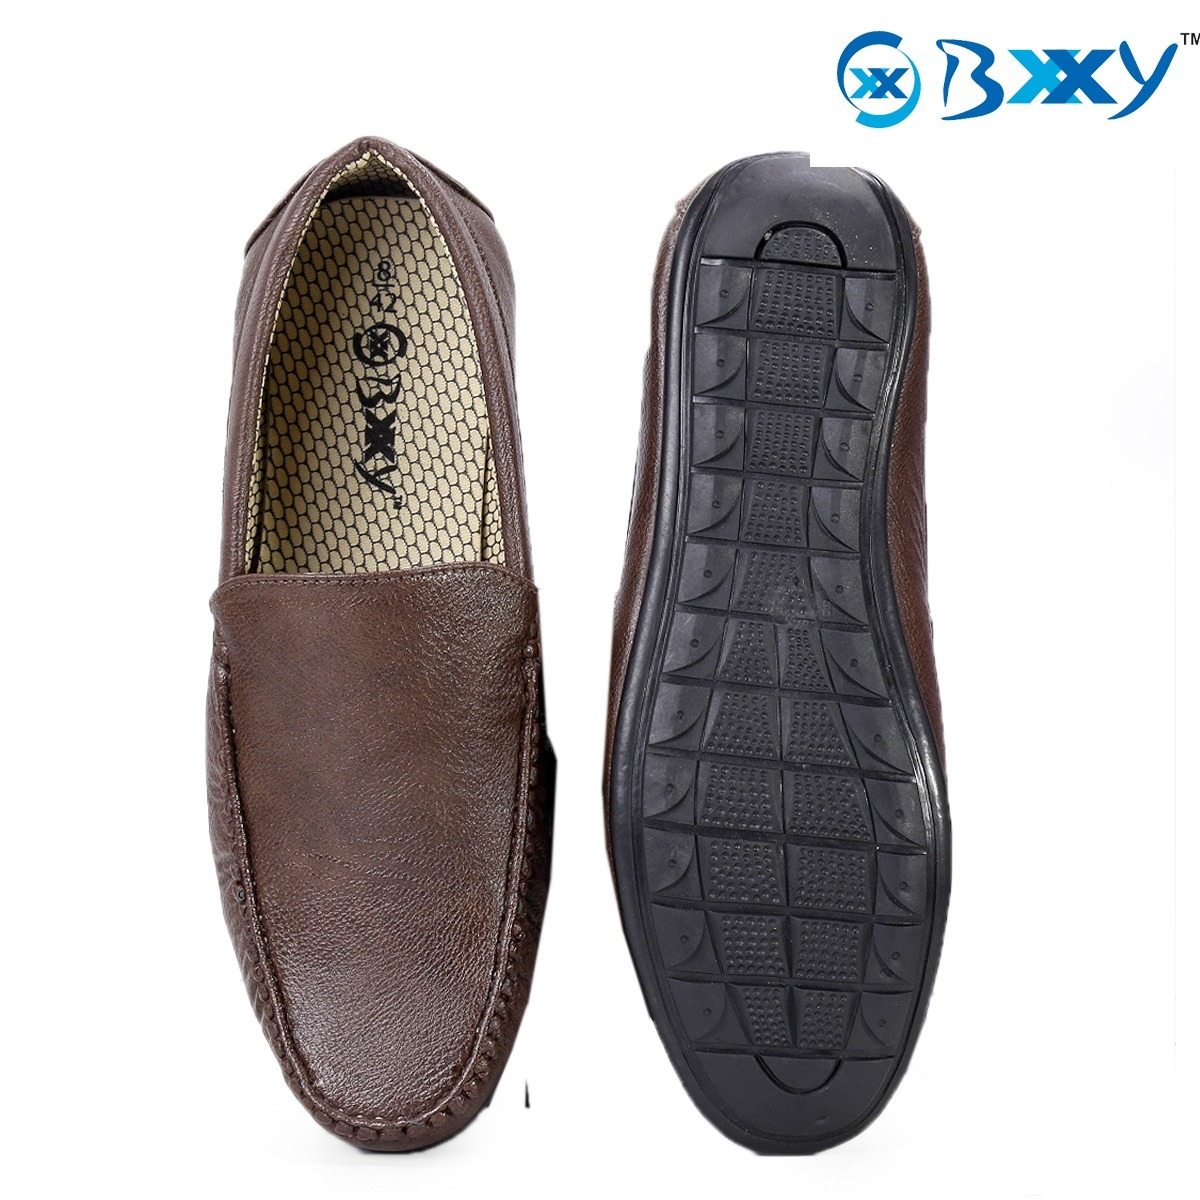 MEN'S LOAFERS SHOES